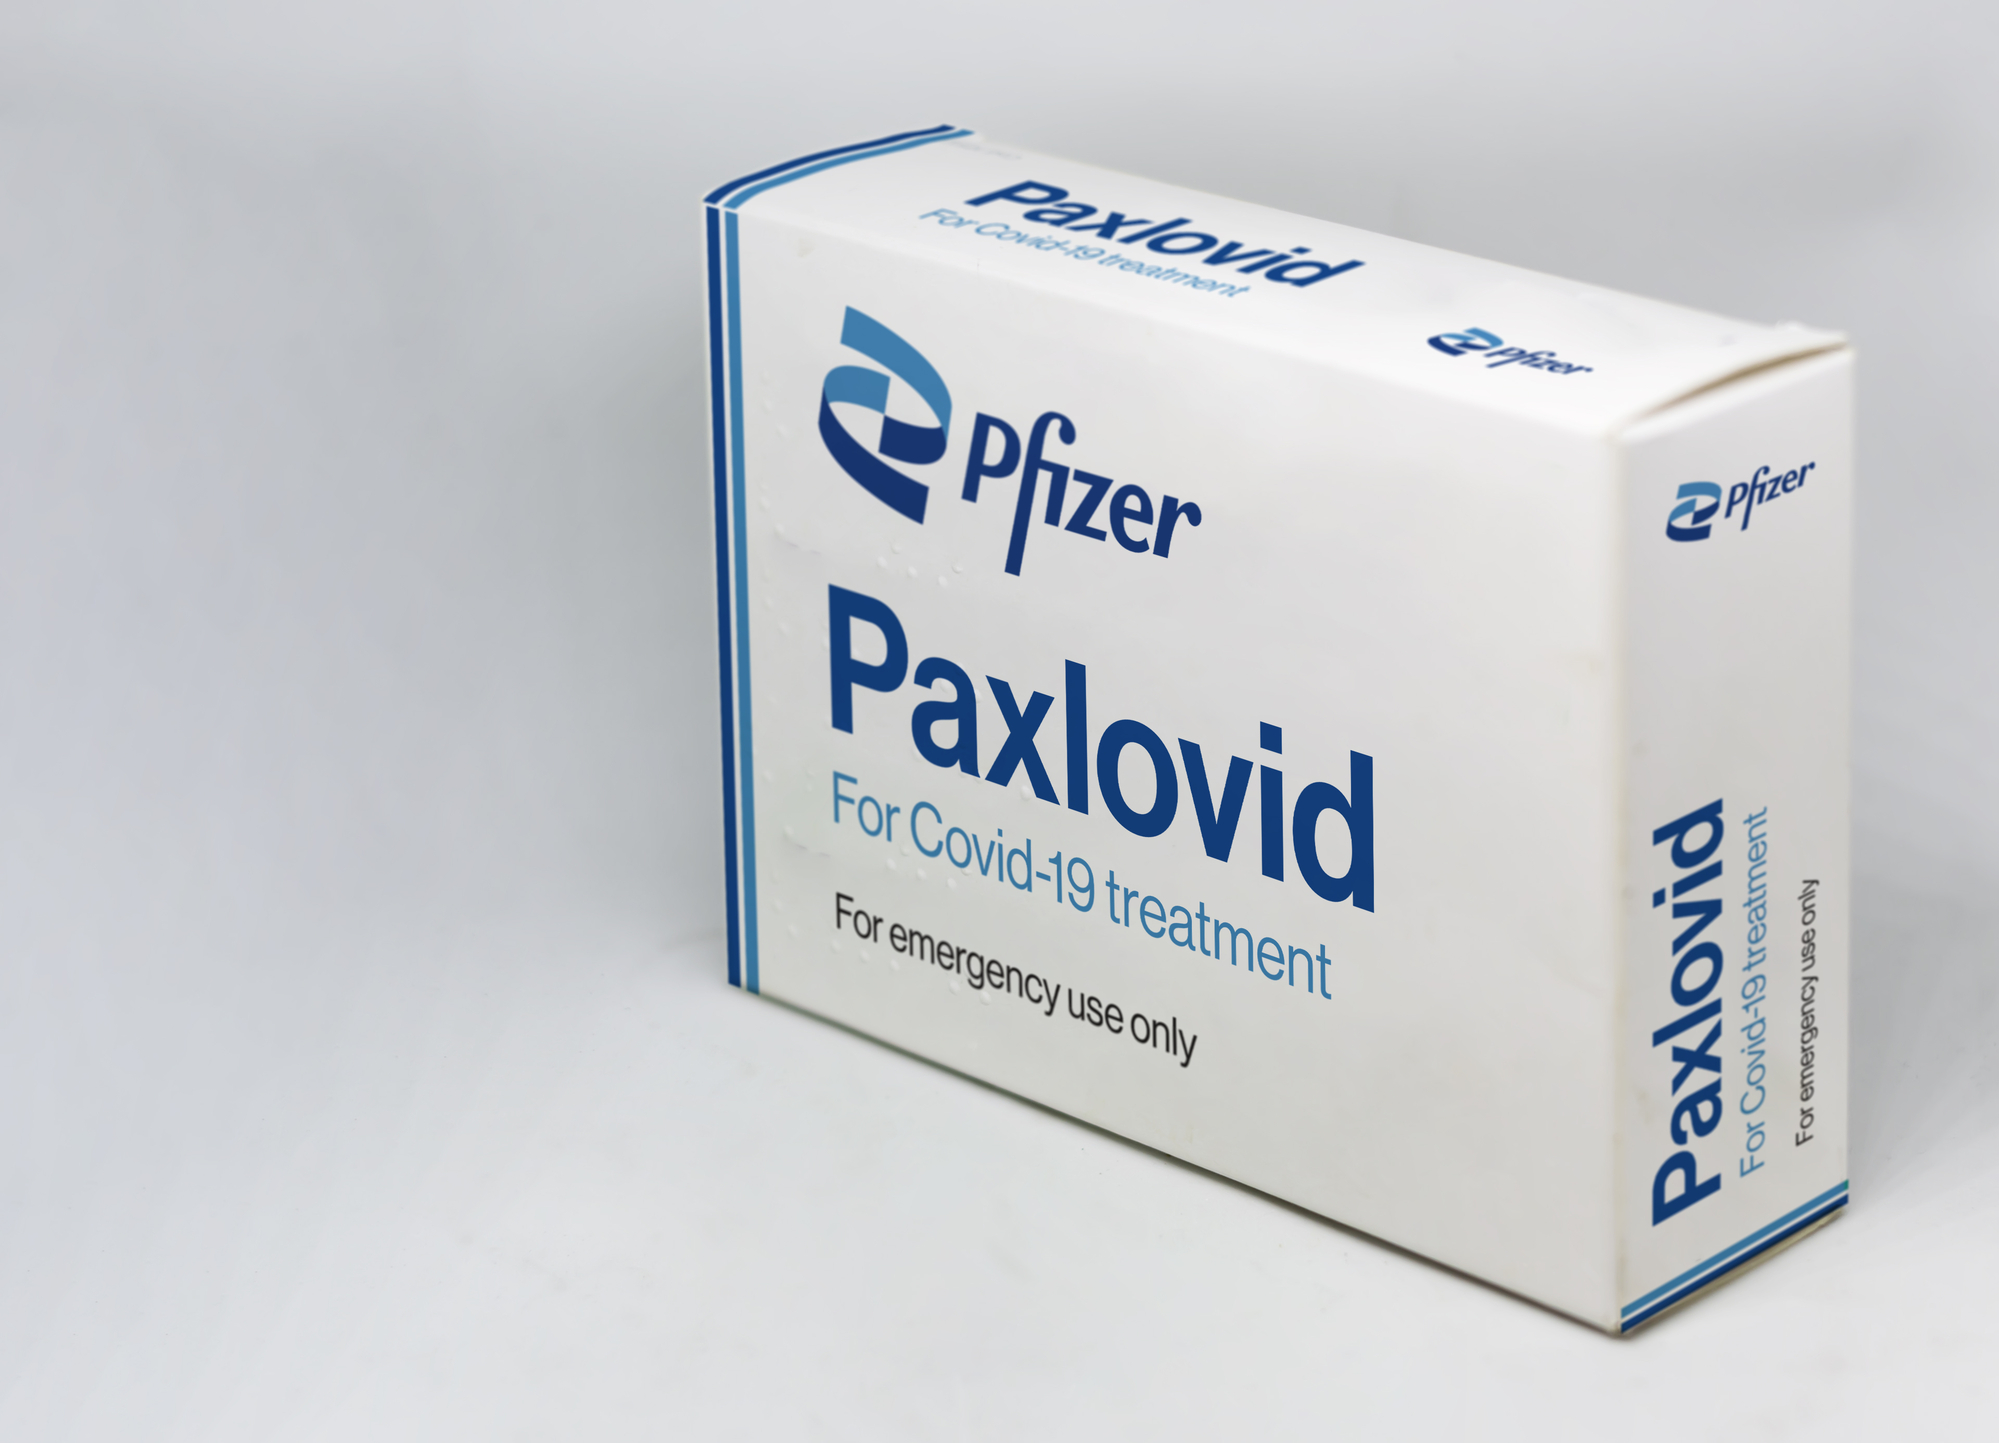 Study shows Paxlovid may help prevent long COVID